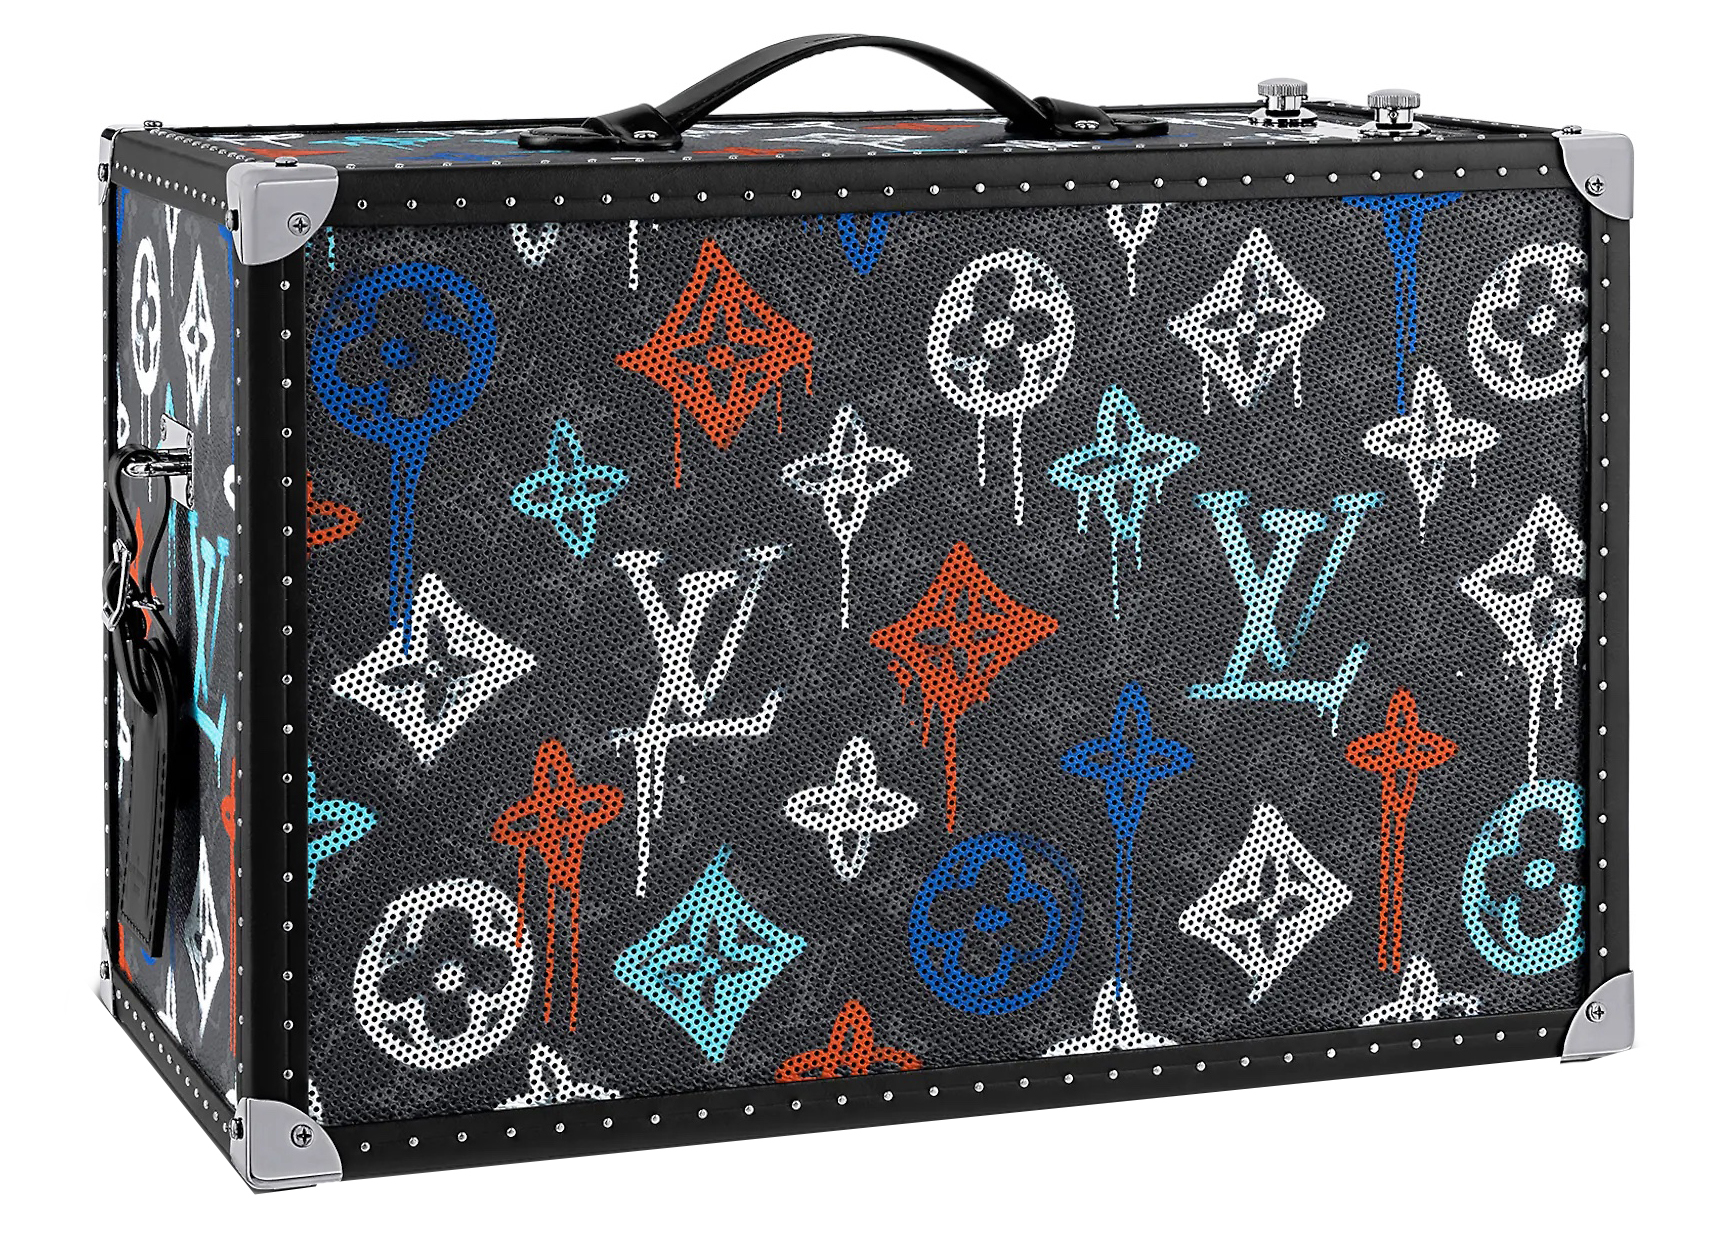 Speaker Trunk PM Monogram Canvas  HighTech Objects and Accessories  LOUIS  VUITTON